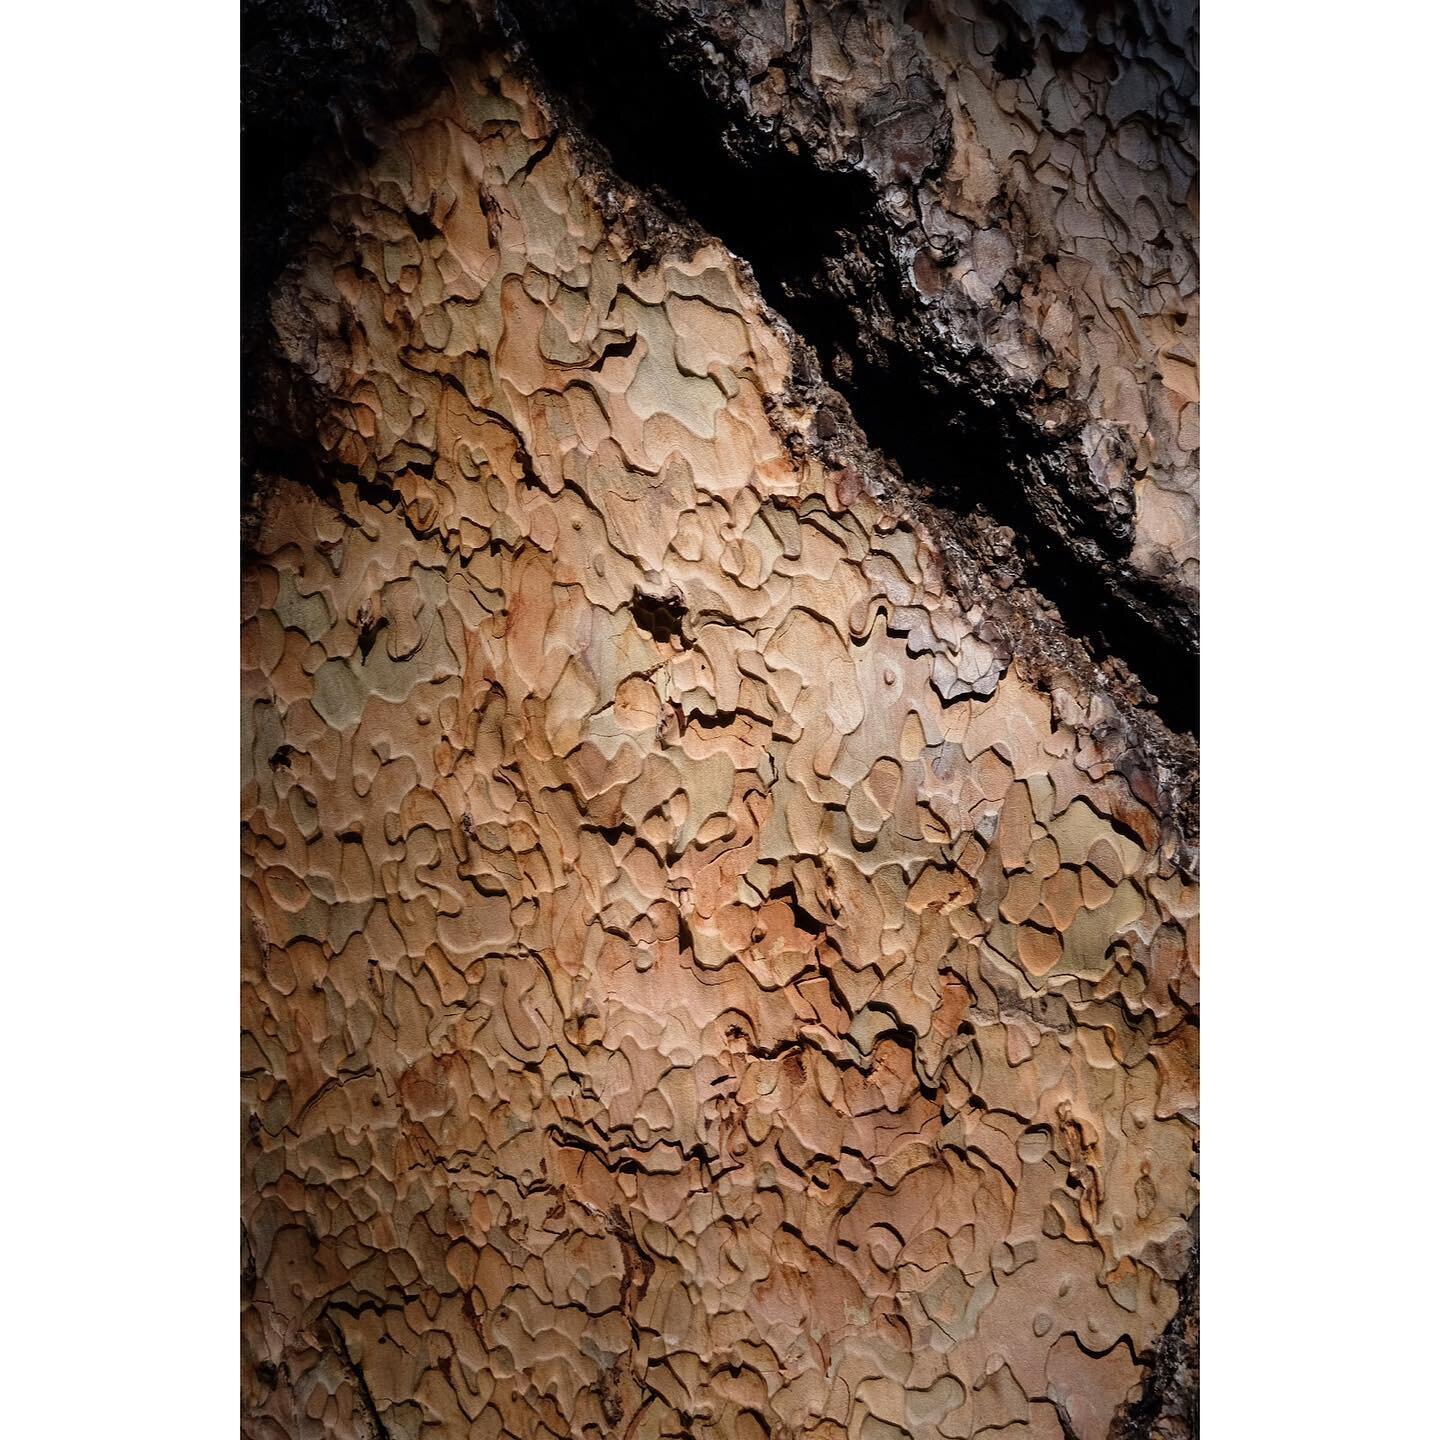 Bark of 500+ year old Pine, Tahoe State Park